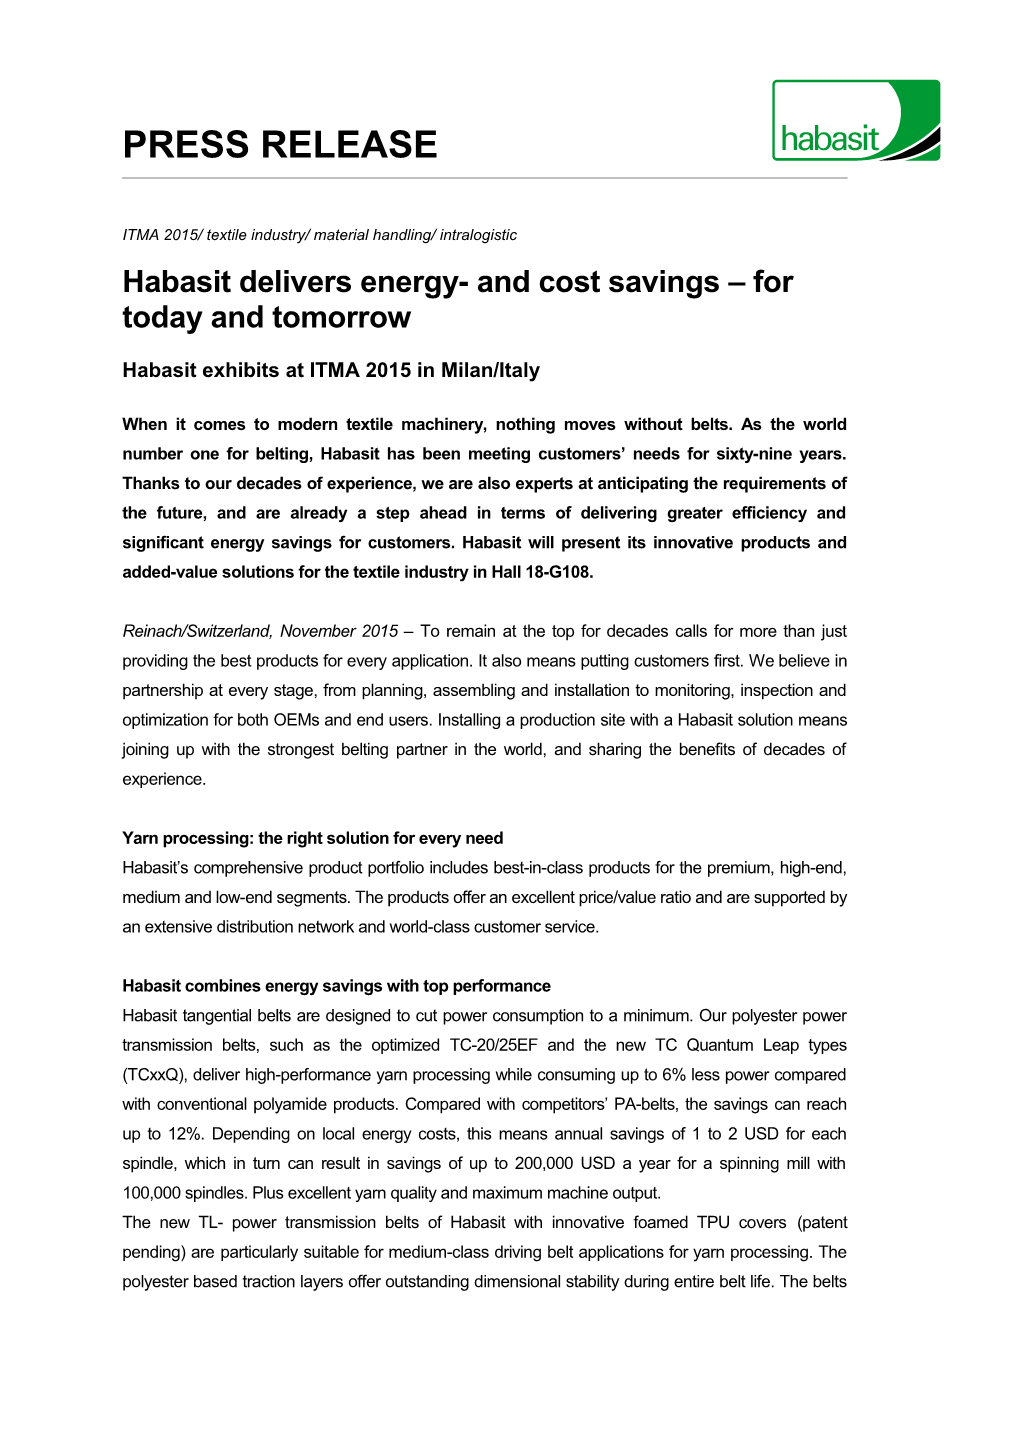 Habasit Delivers Energy- and Cost Savings for Today and Tomorrow